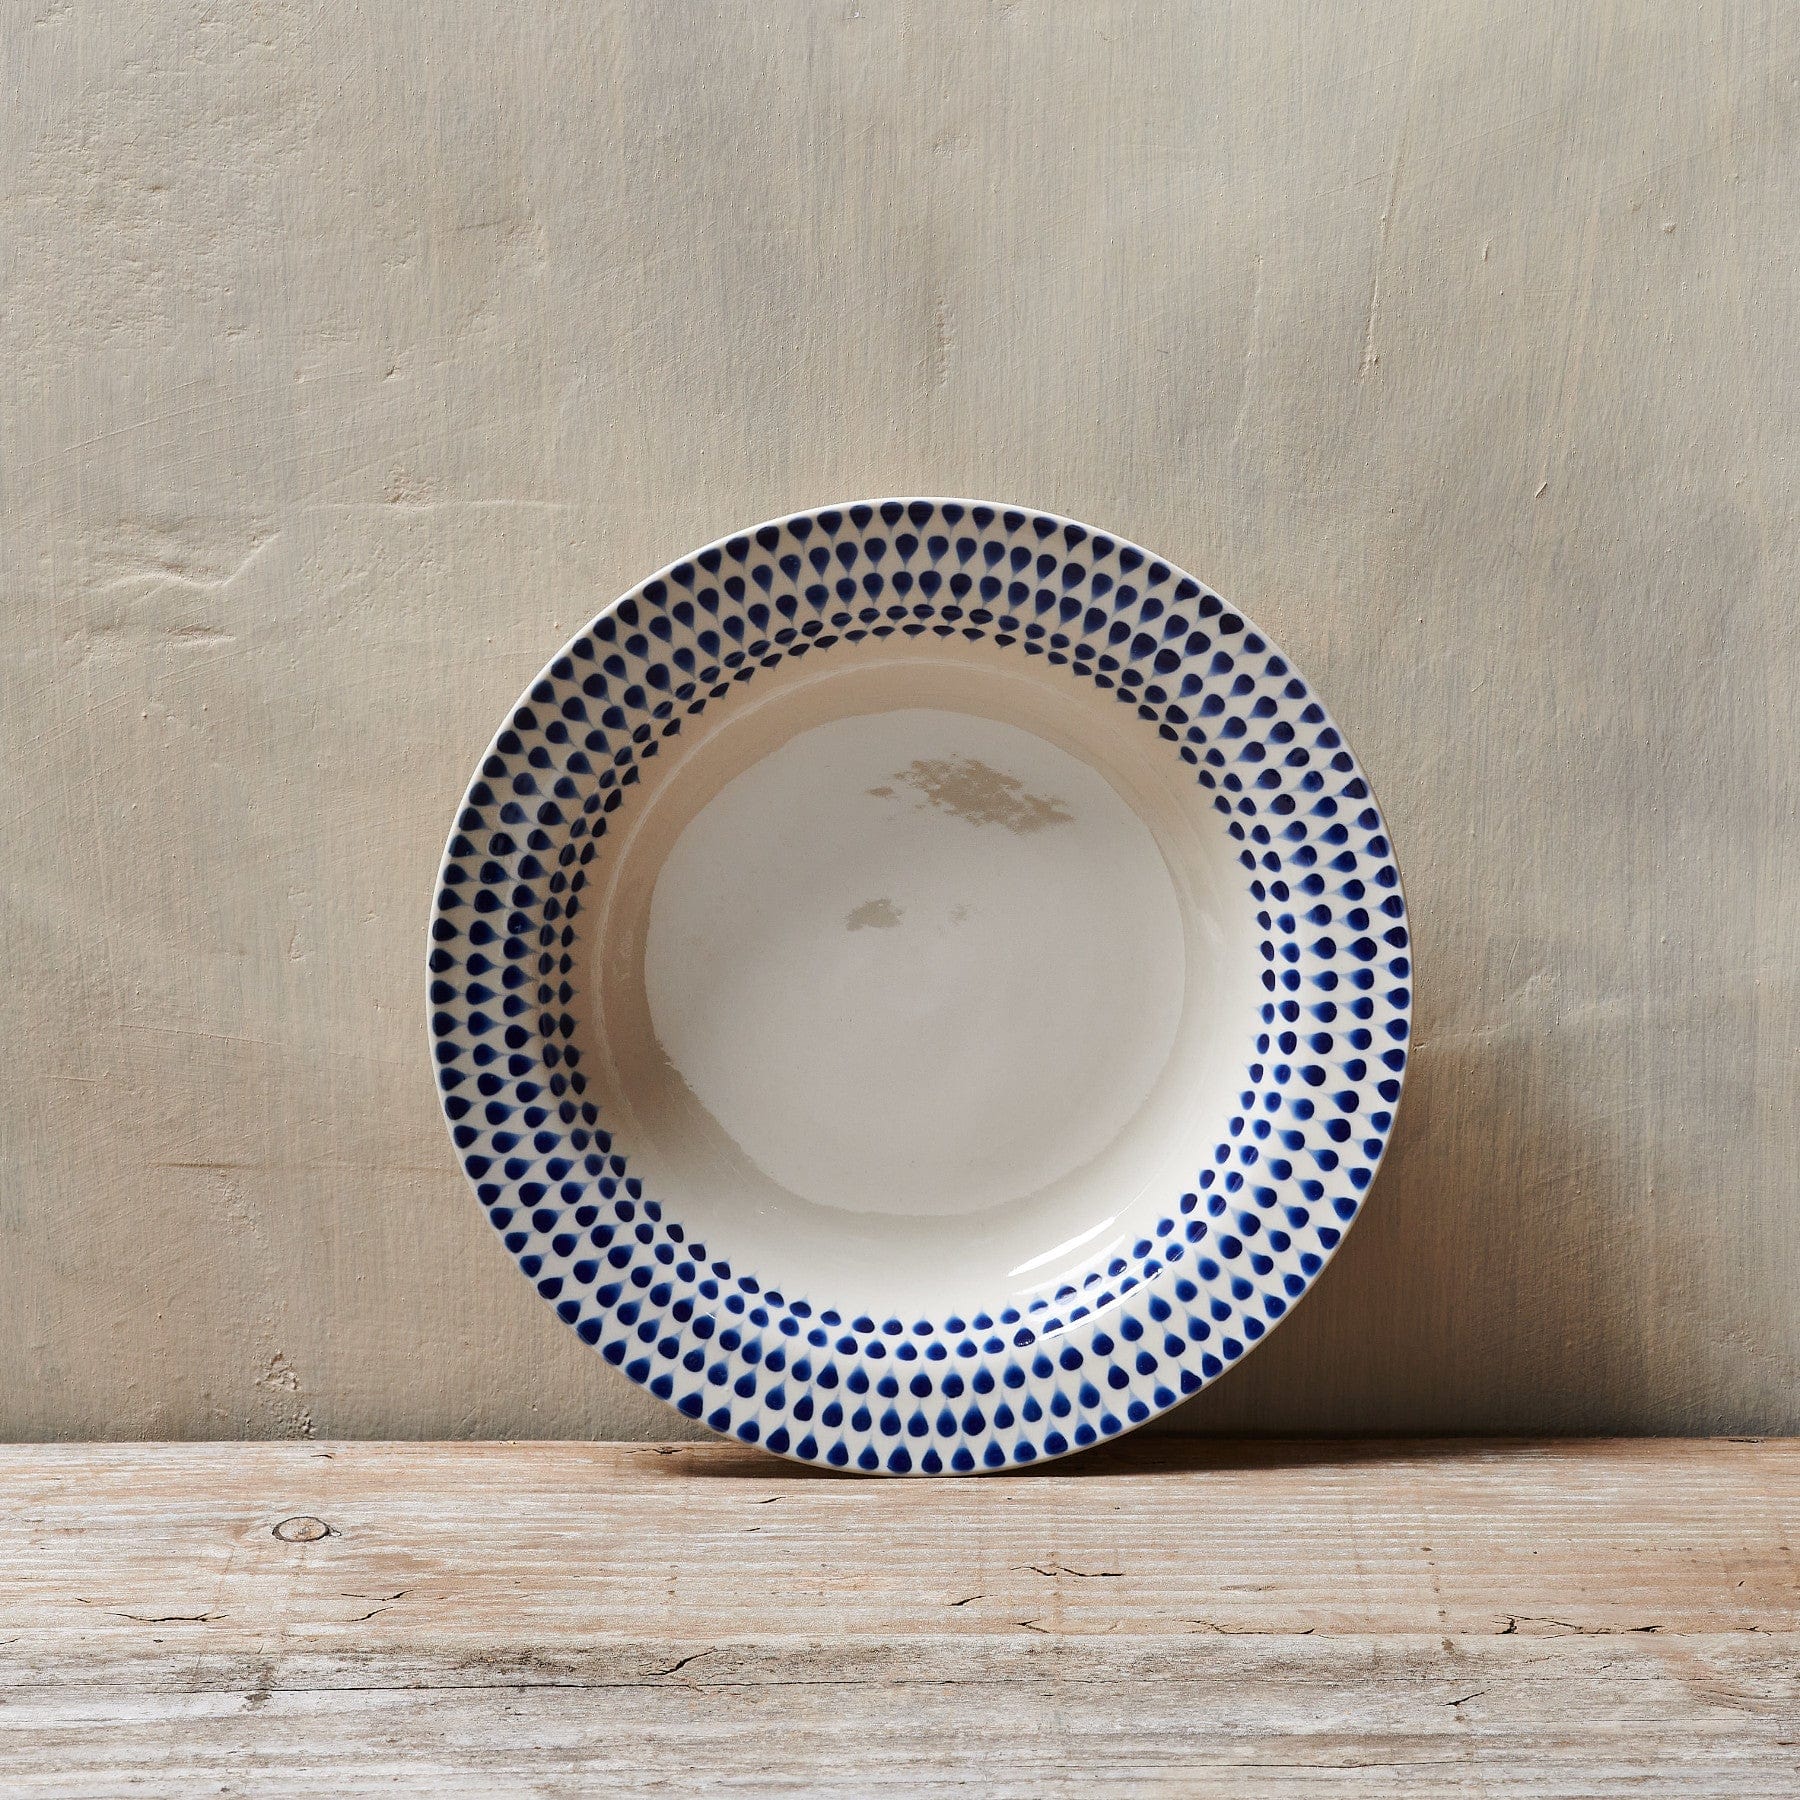 Blue and white patterned ceramic plate on a rustic wooden surface against a neutral background